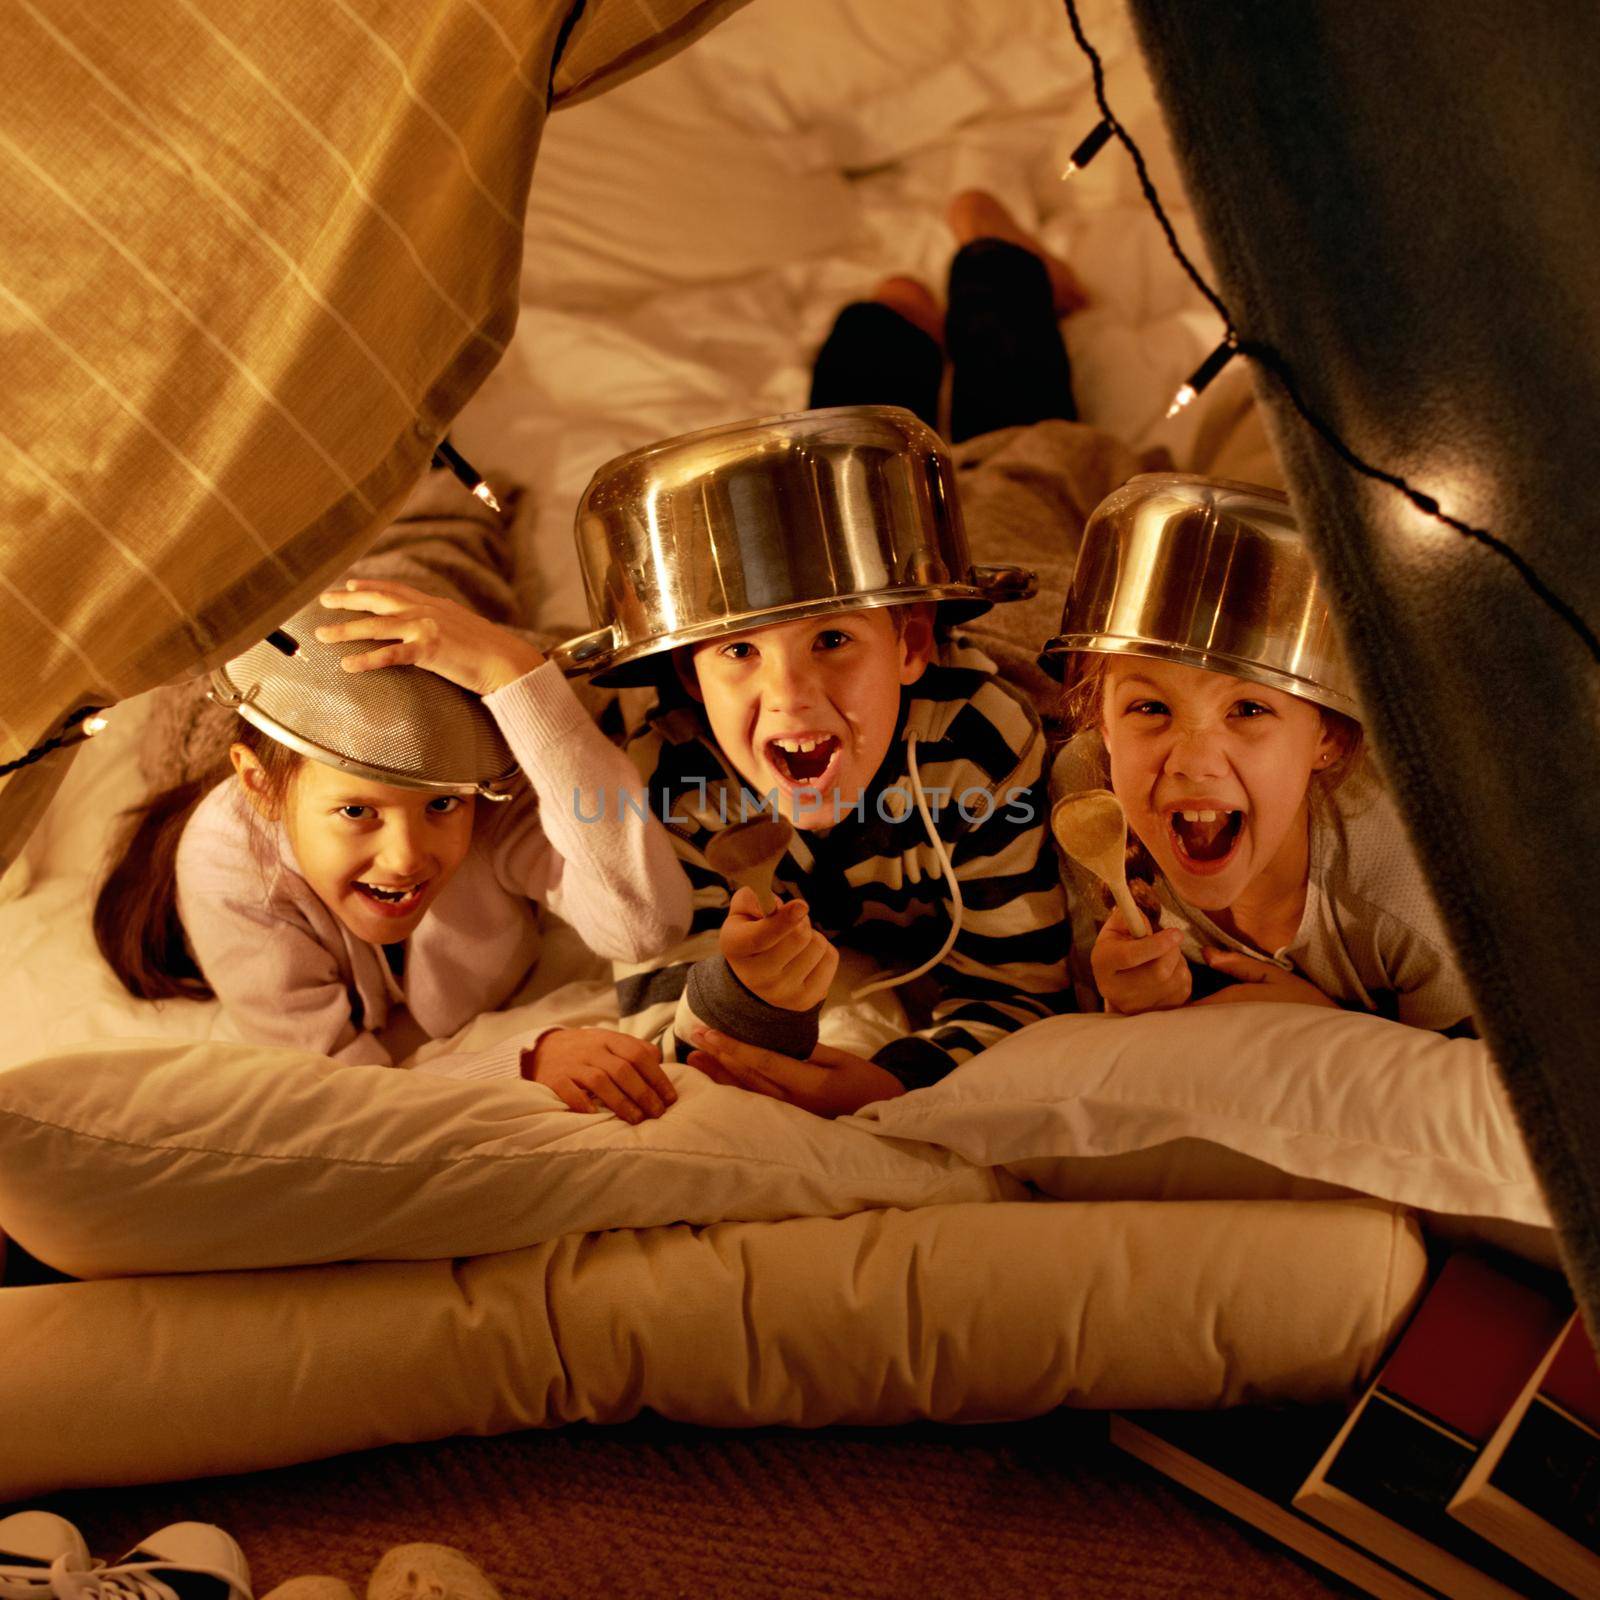 Youll never take us. cute little children with pot helmets in a blanket fort